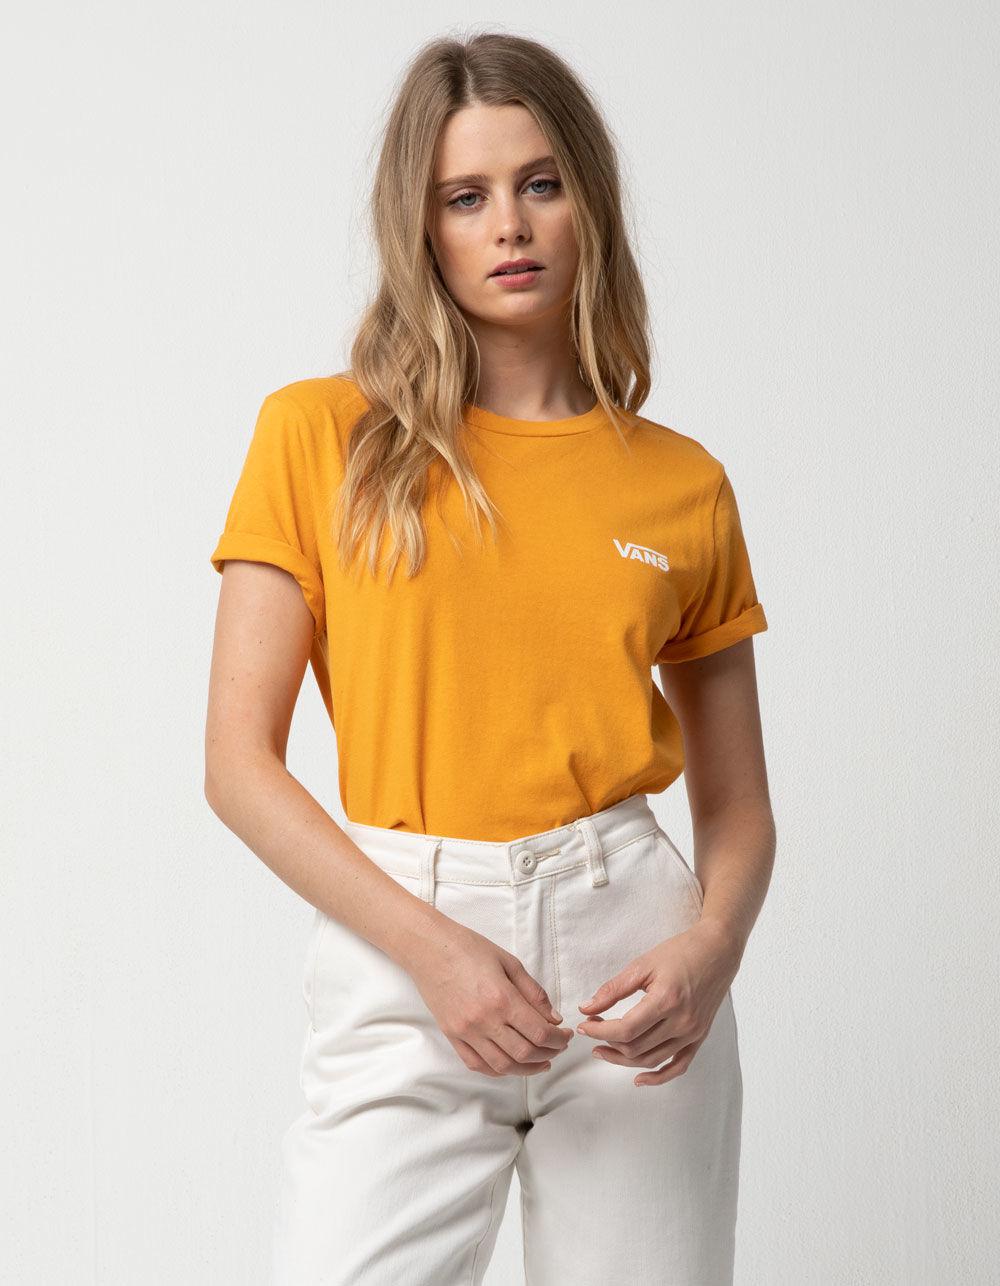 vans sunflower checkered womens tee Shop Clothing & Shoes Online